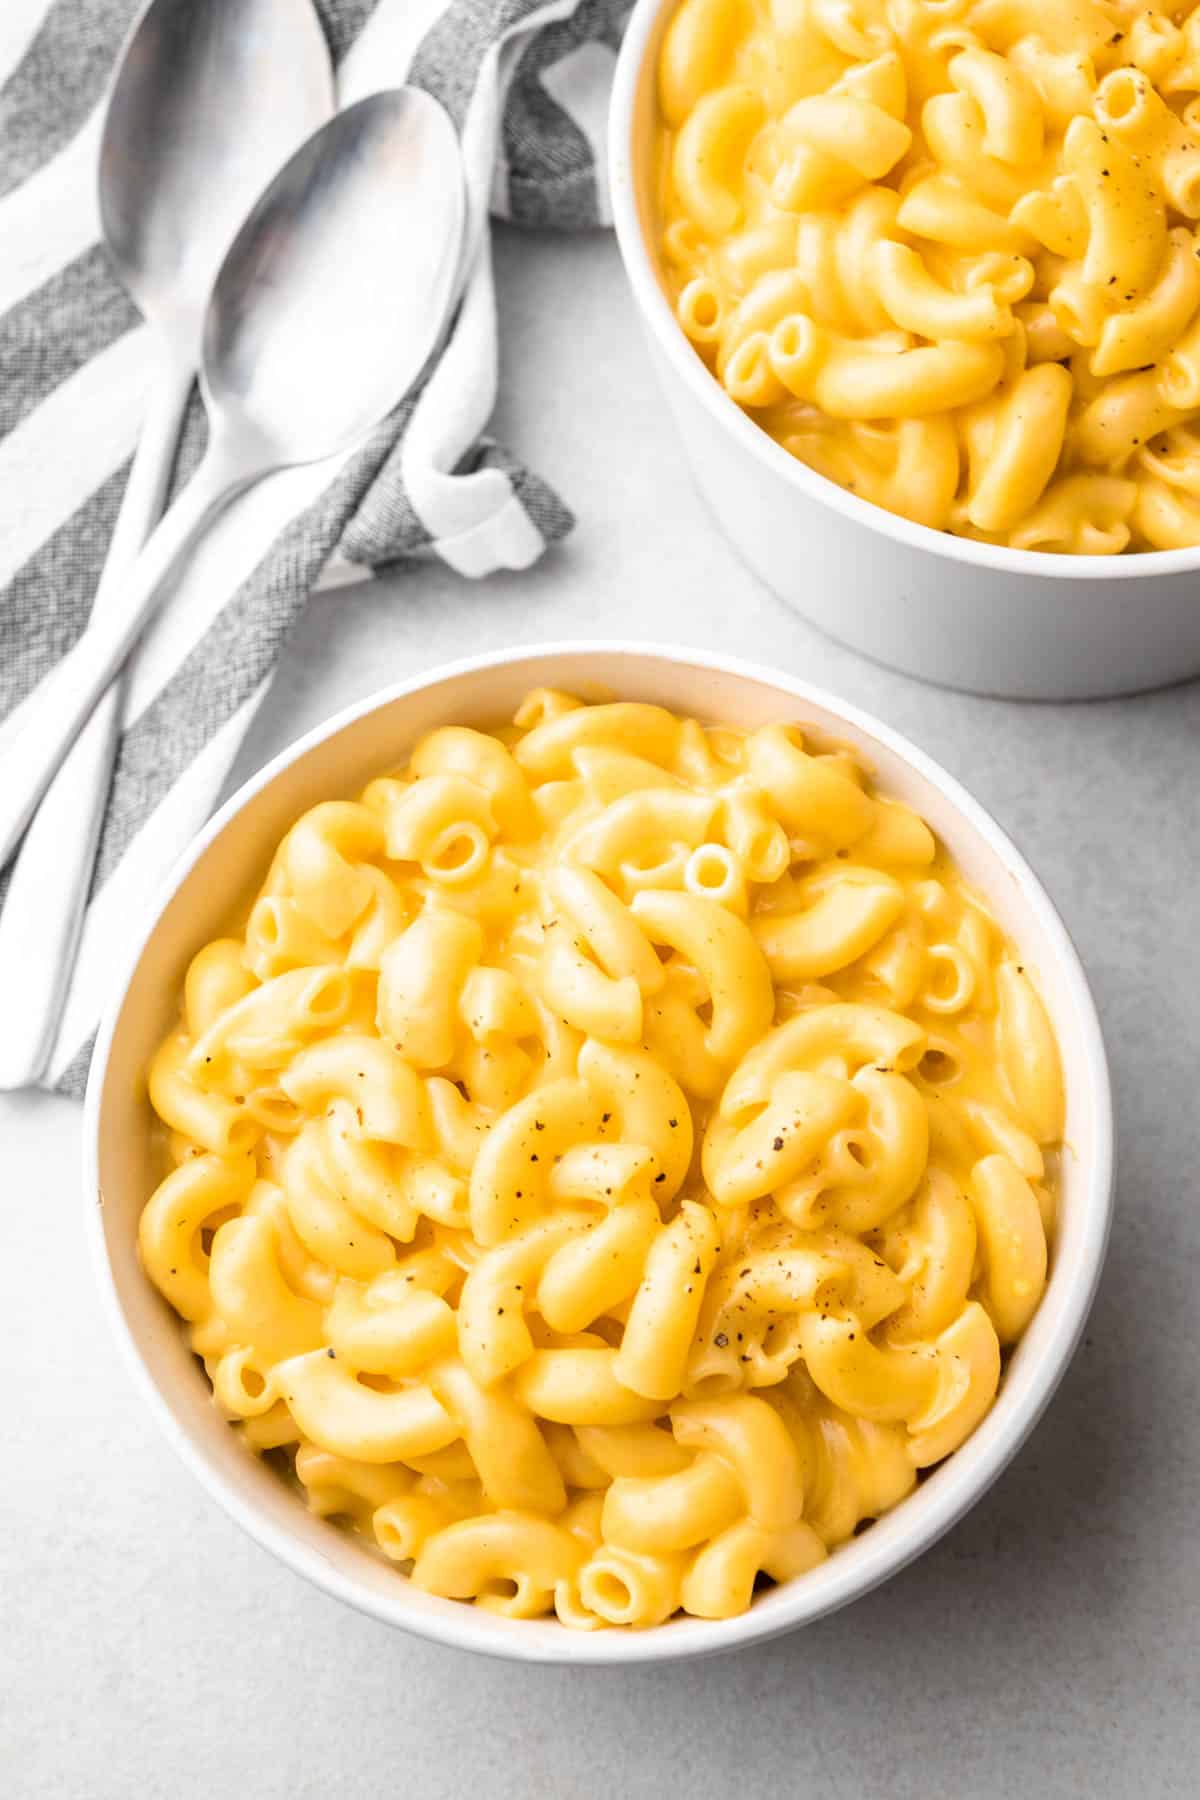 Mac and cheese in white bowls with spoons and a striped cloth